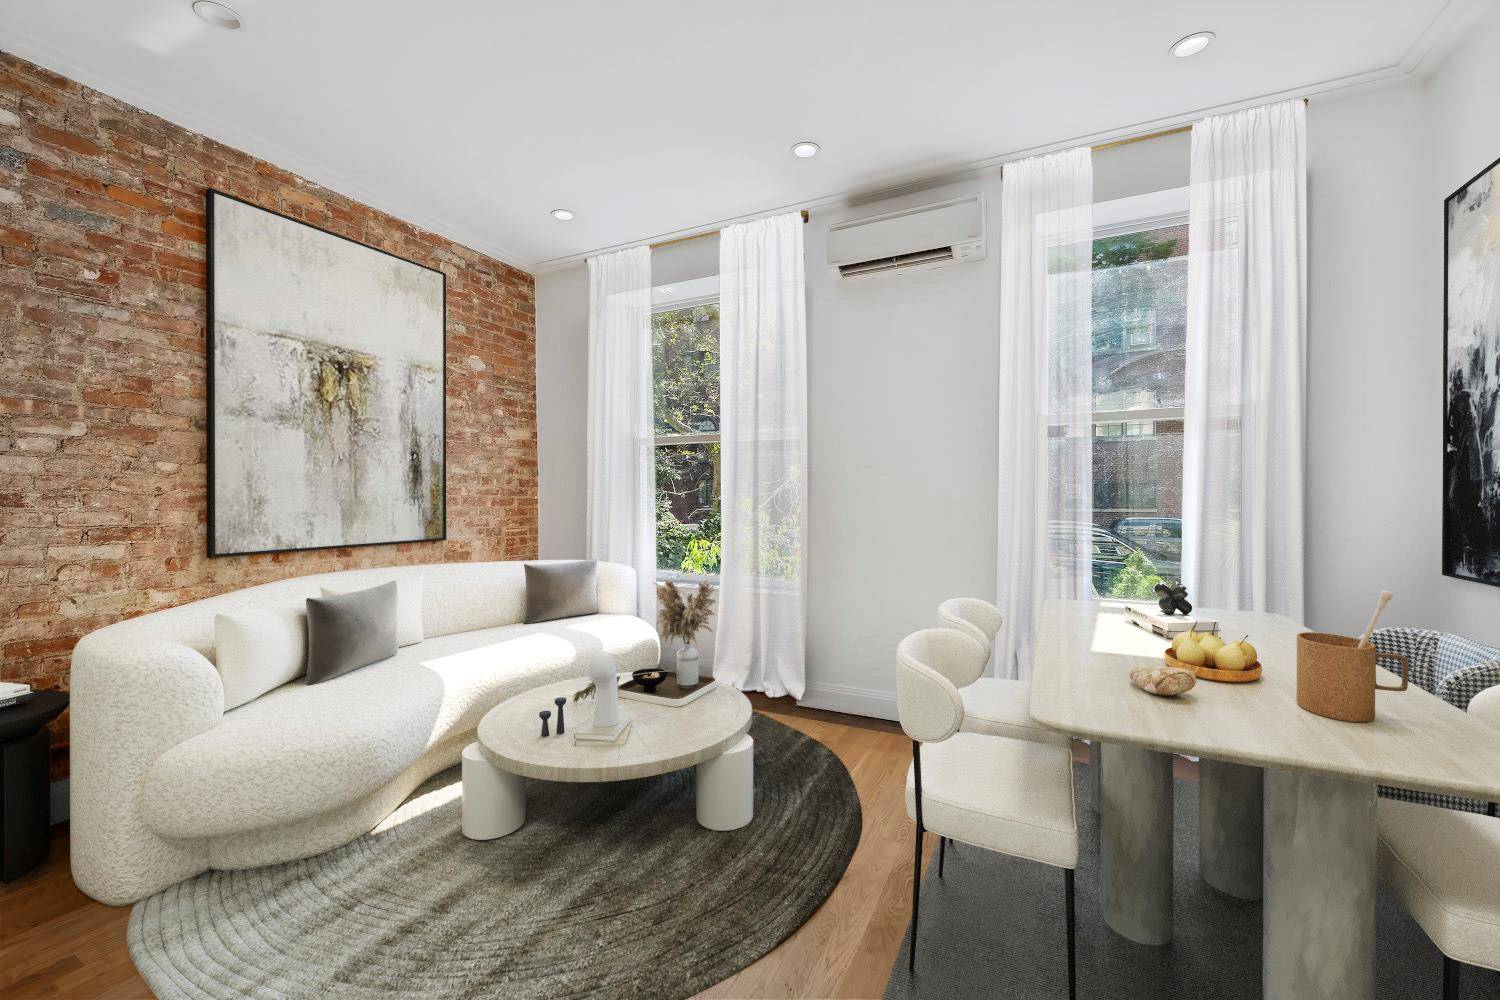 Welcome home to Duplex F at 445 West 21st Street, nestled in the vibrant neighborhood of West Chelsea.